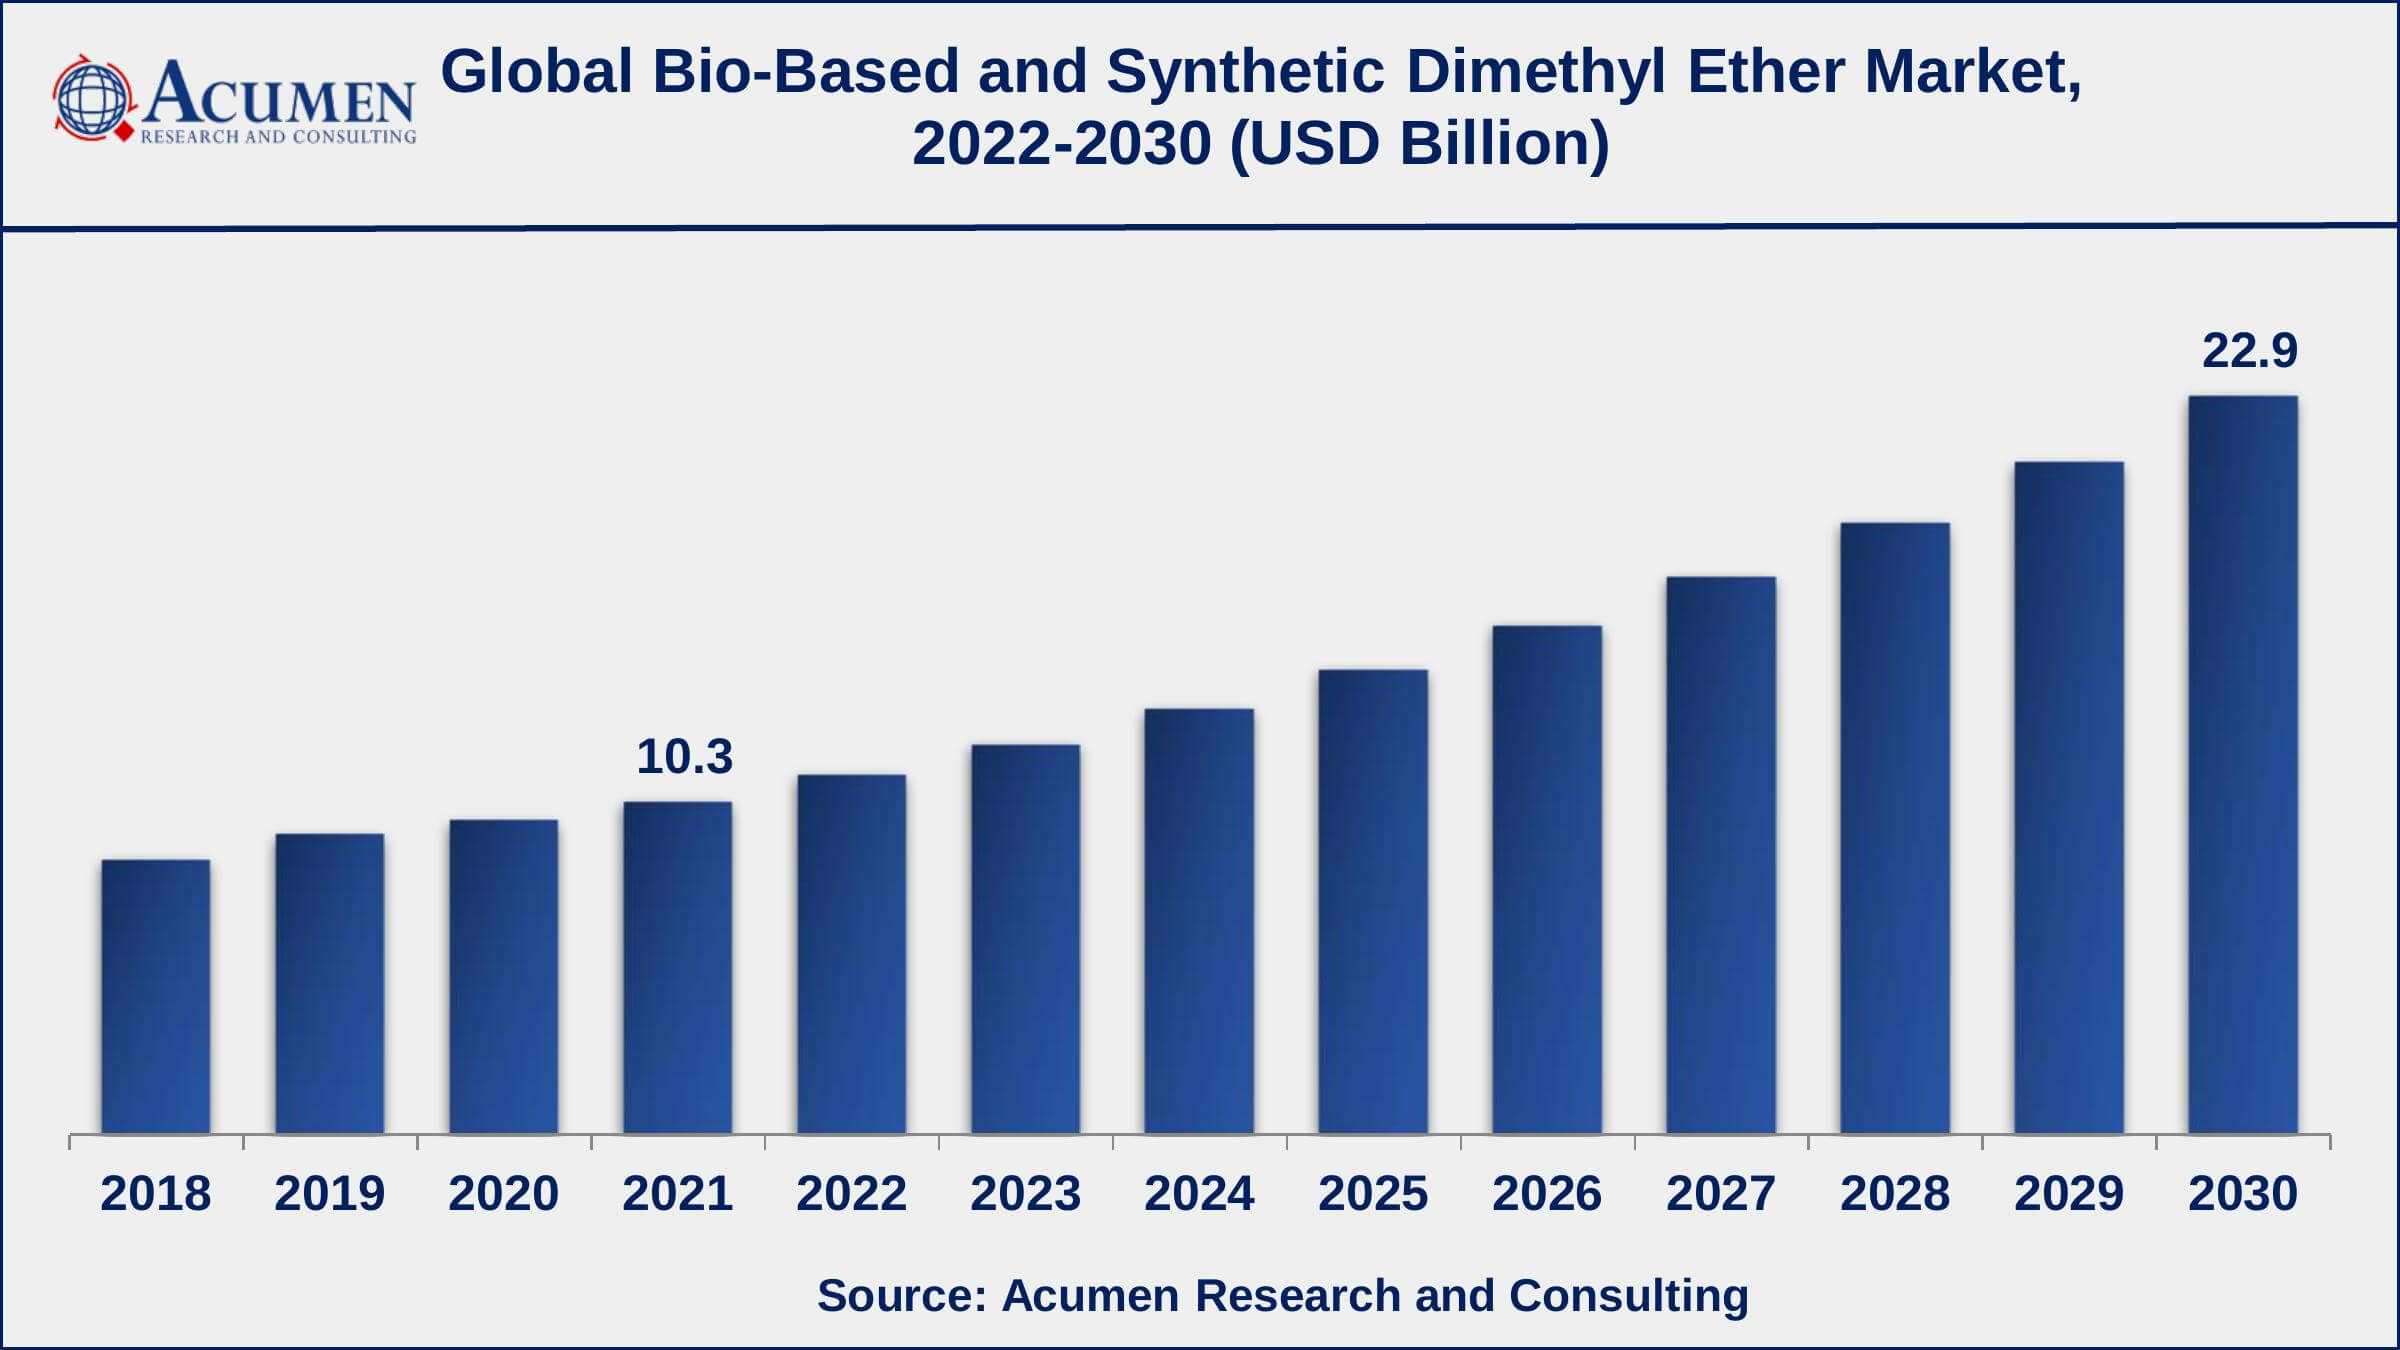 North America bio-based and synthetic dimethyl ether market growth will register CAGR of over 10% from 2022 to 2030